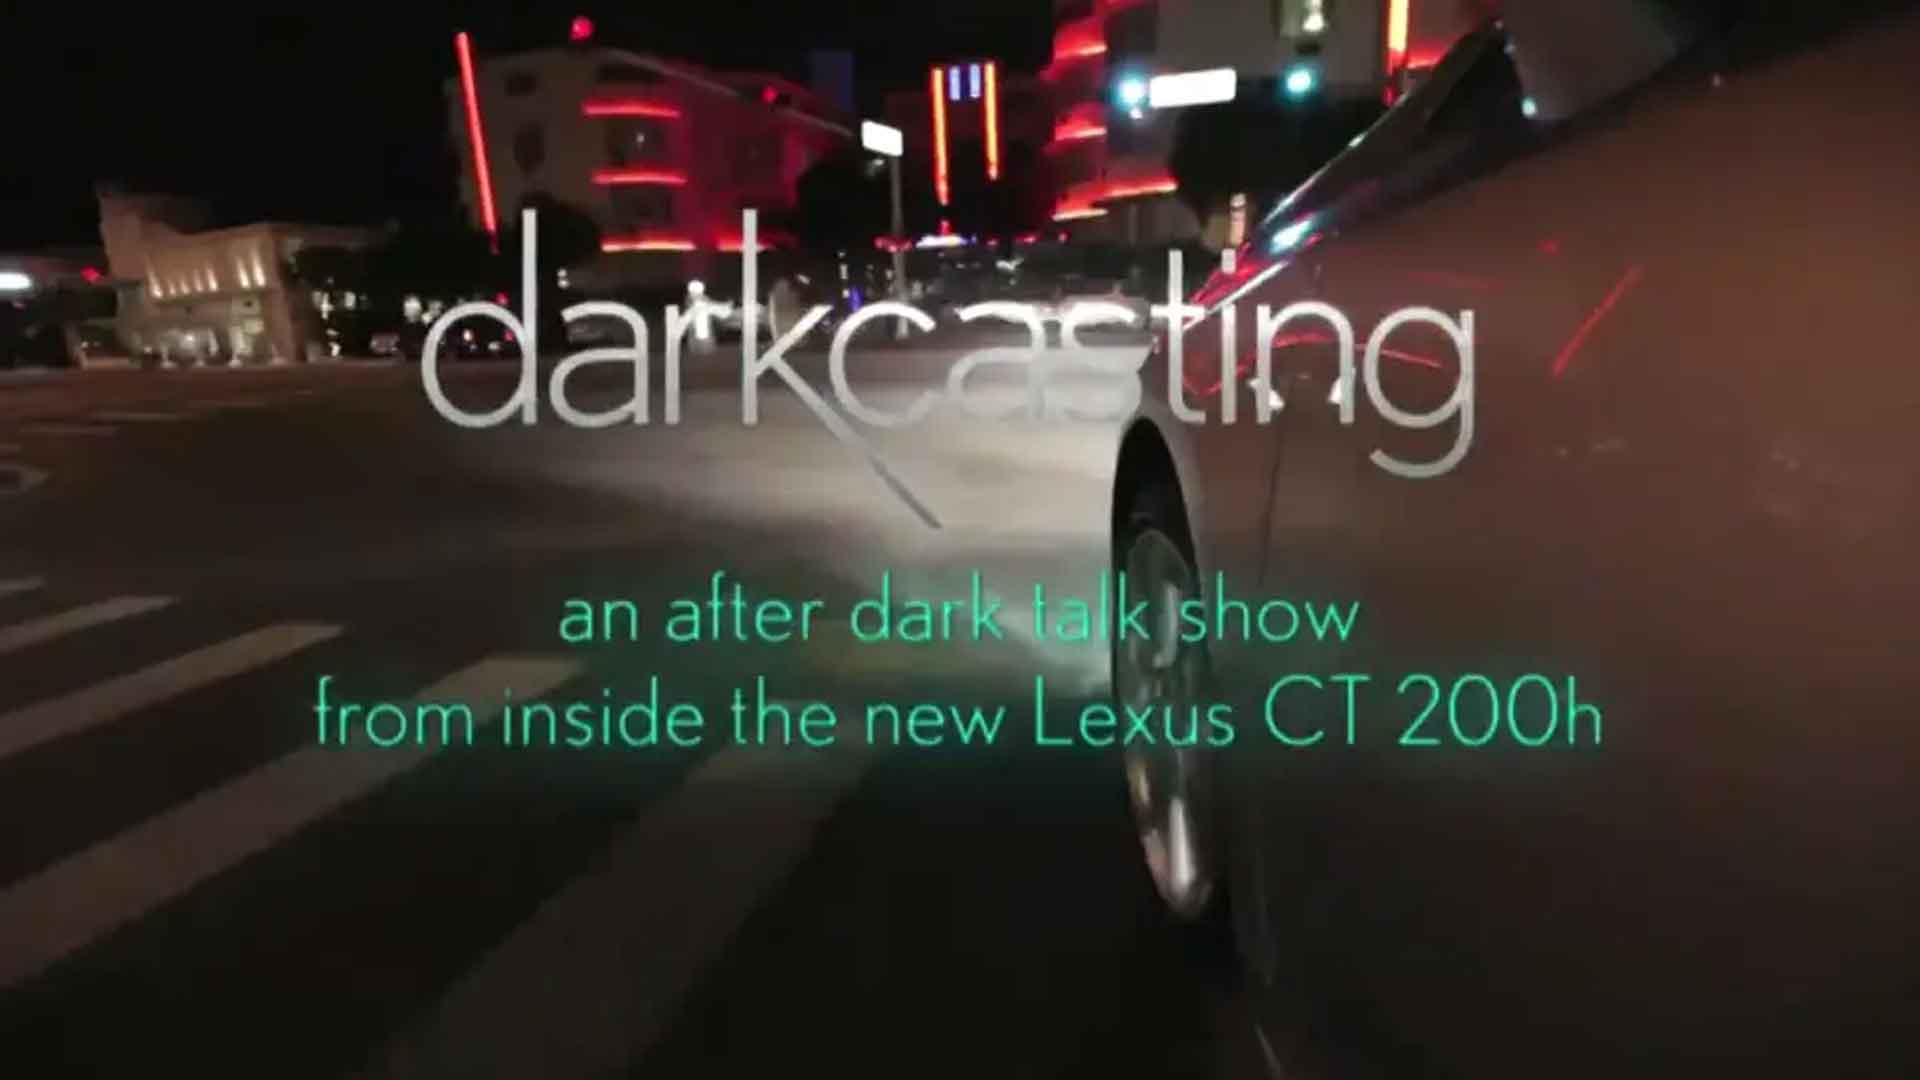 Darkcasting: Lexus Launches New Online Interview Series With Whitney Cummings